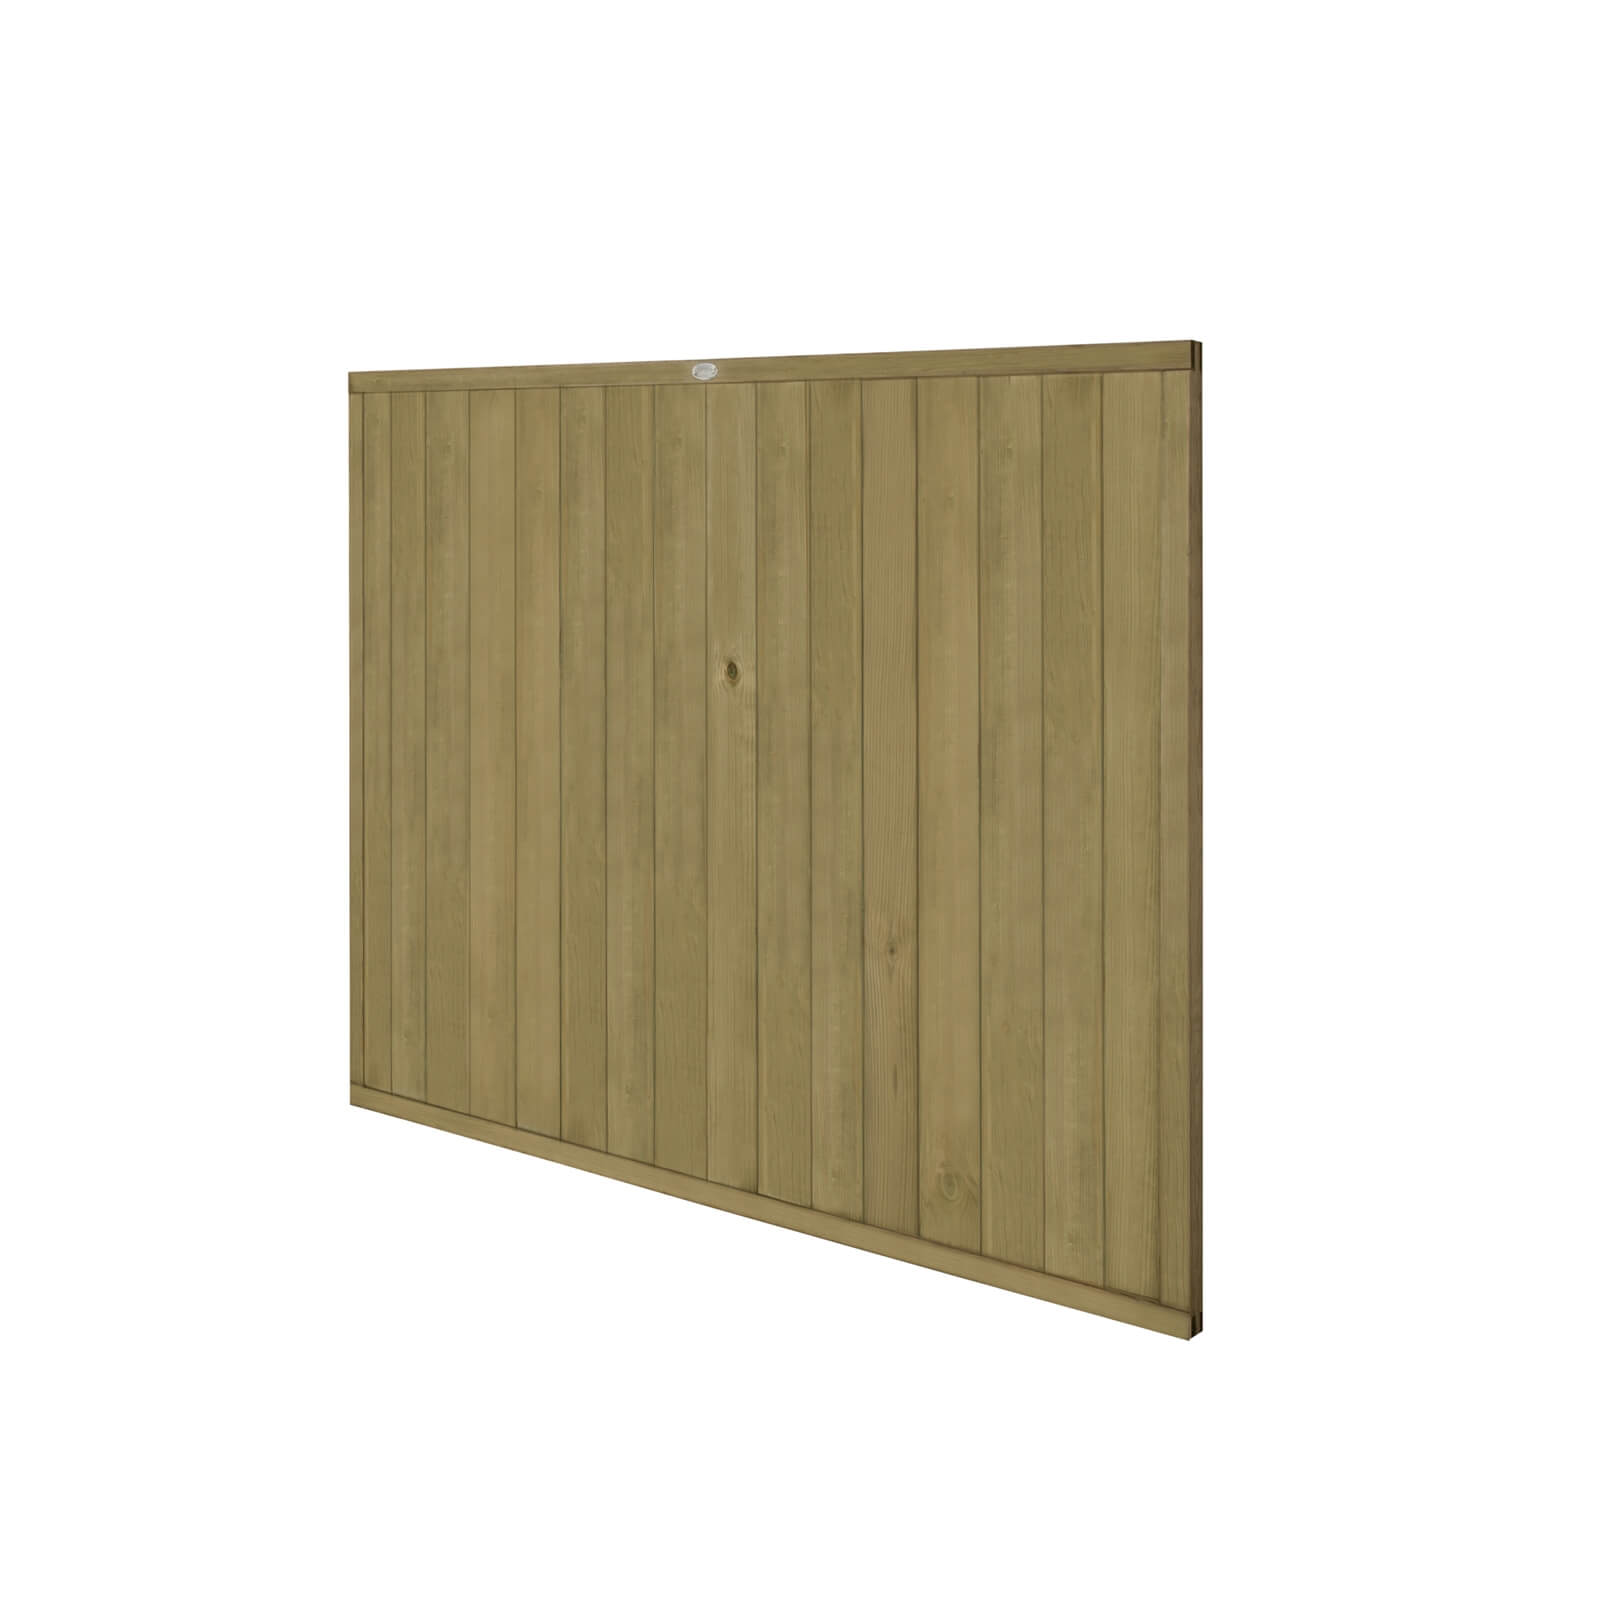 Forest Vertical Tongue & Groove Fence Panel - 5ft - Pack of 5